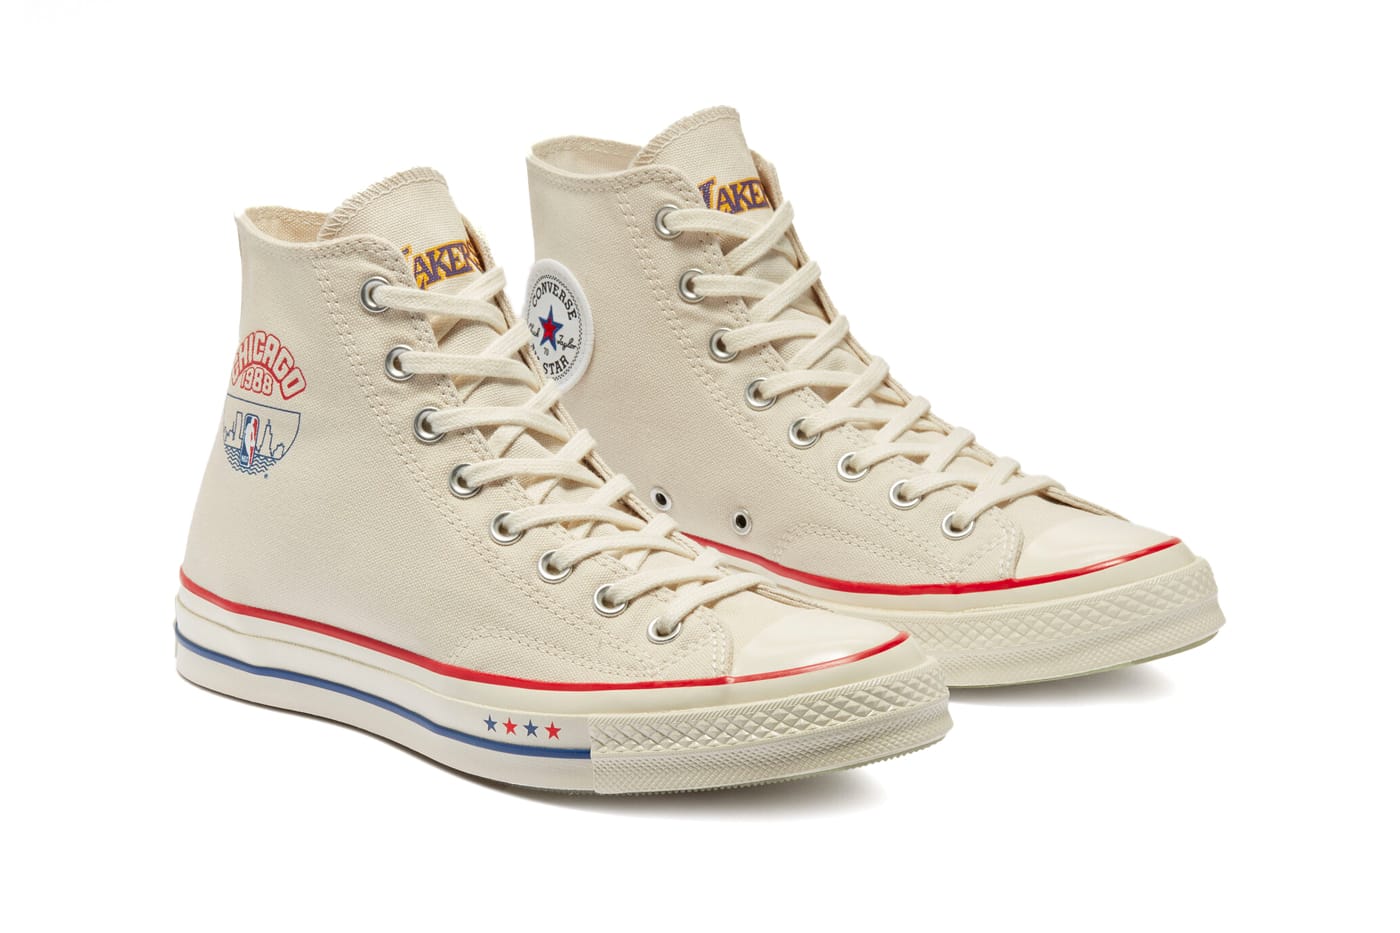 converse basketball shoes 199s